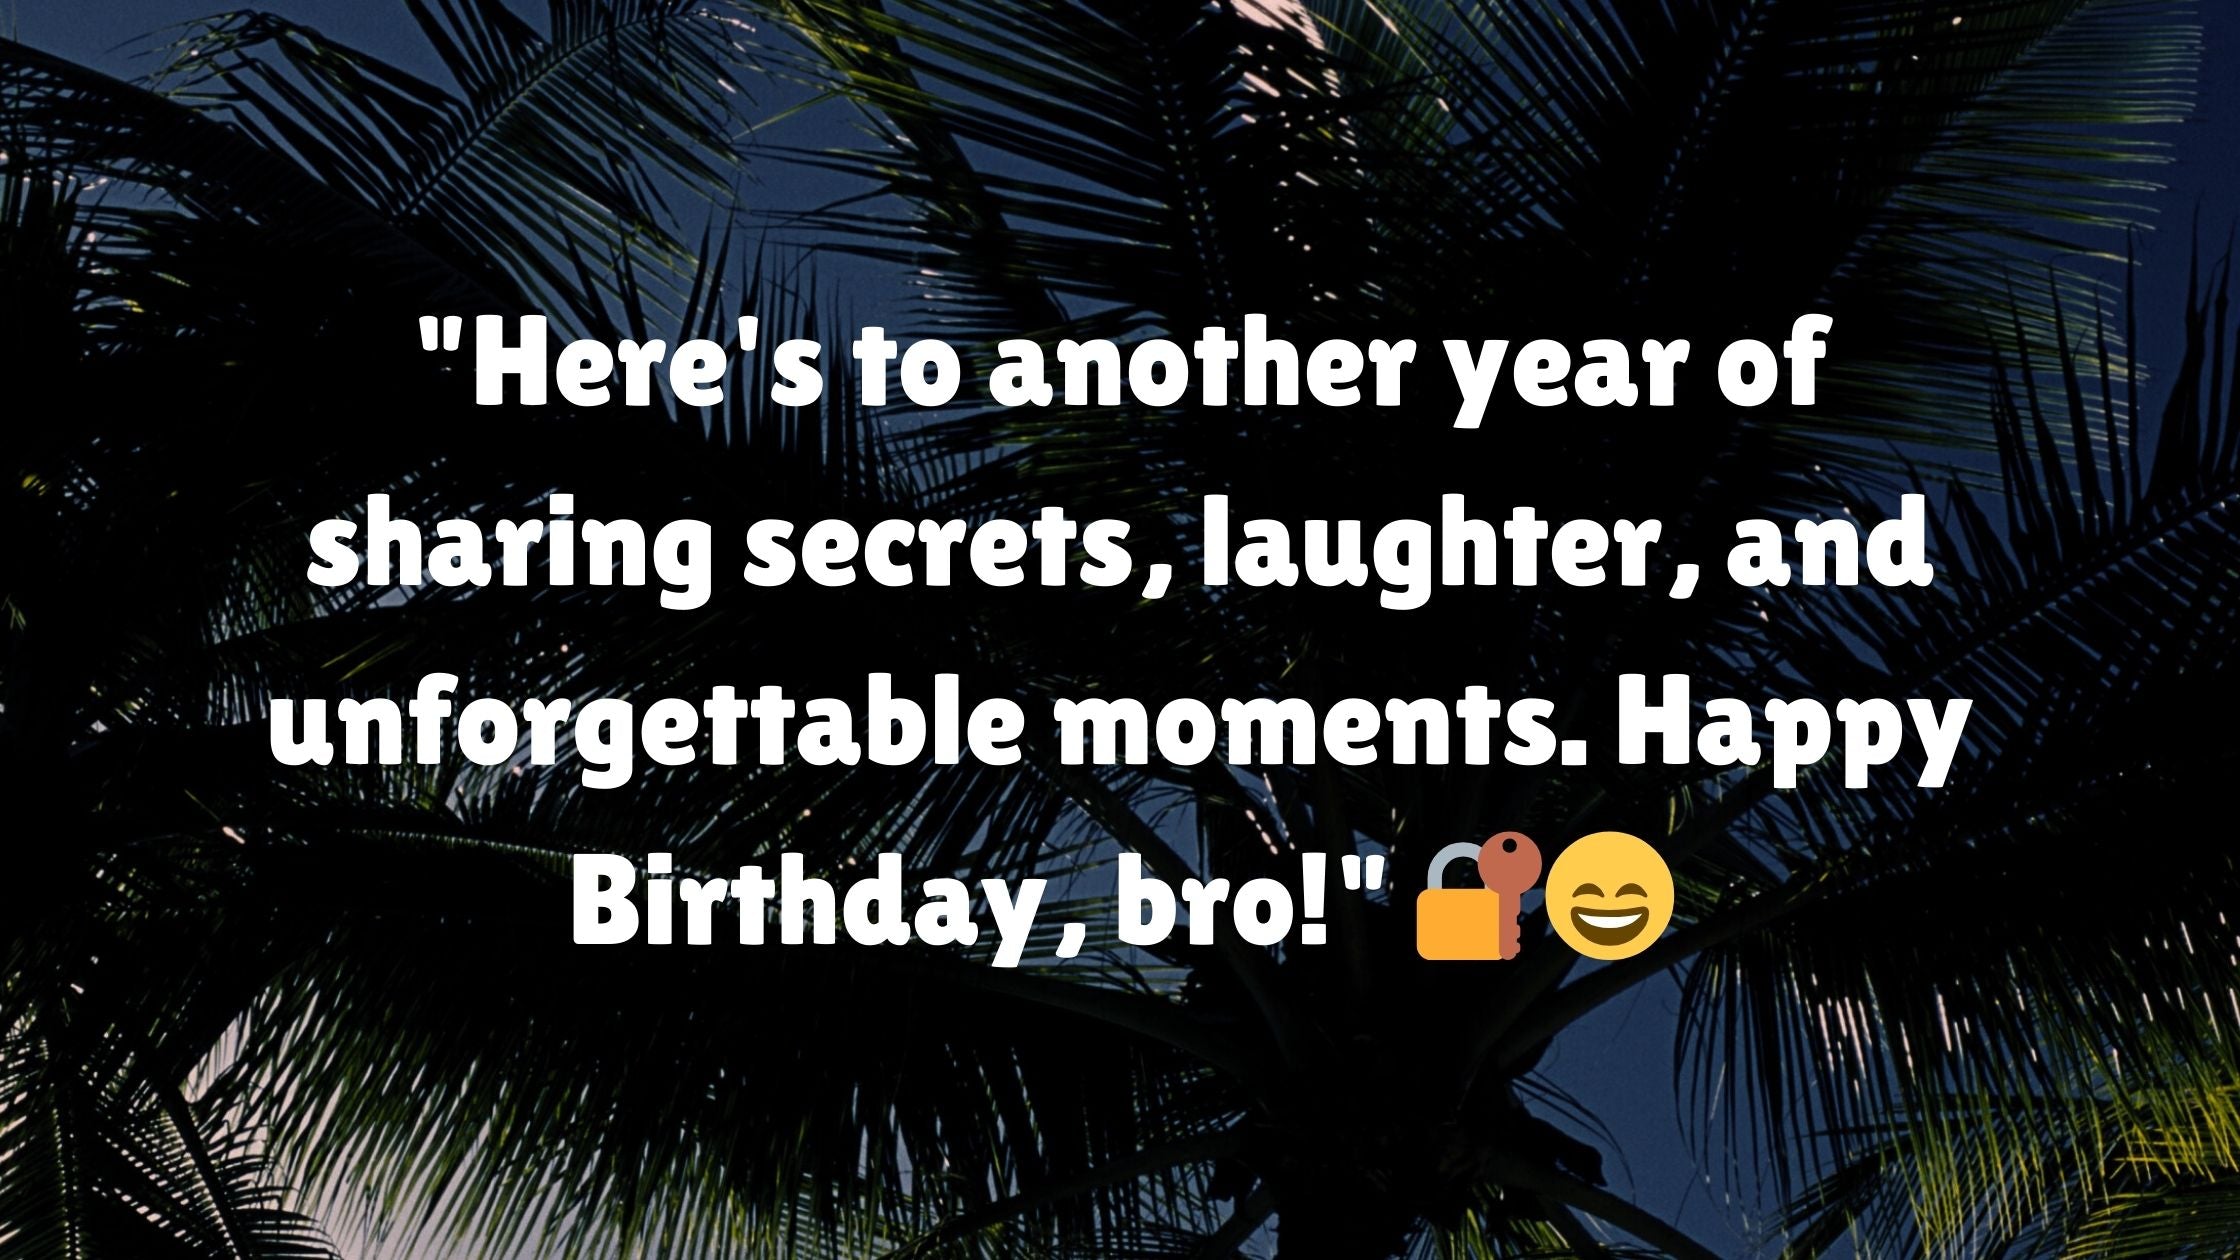 15 Heartfelt Quotes to Wish Your Brother a Happy Birthday 🎉🎂💙